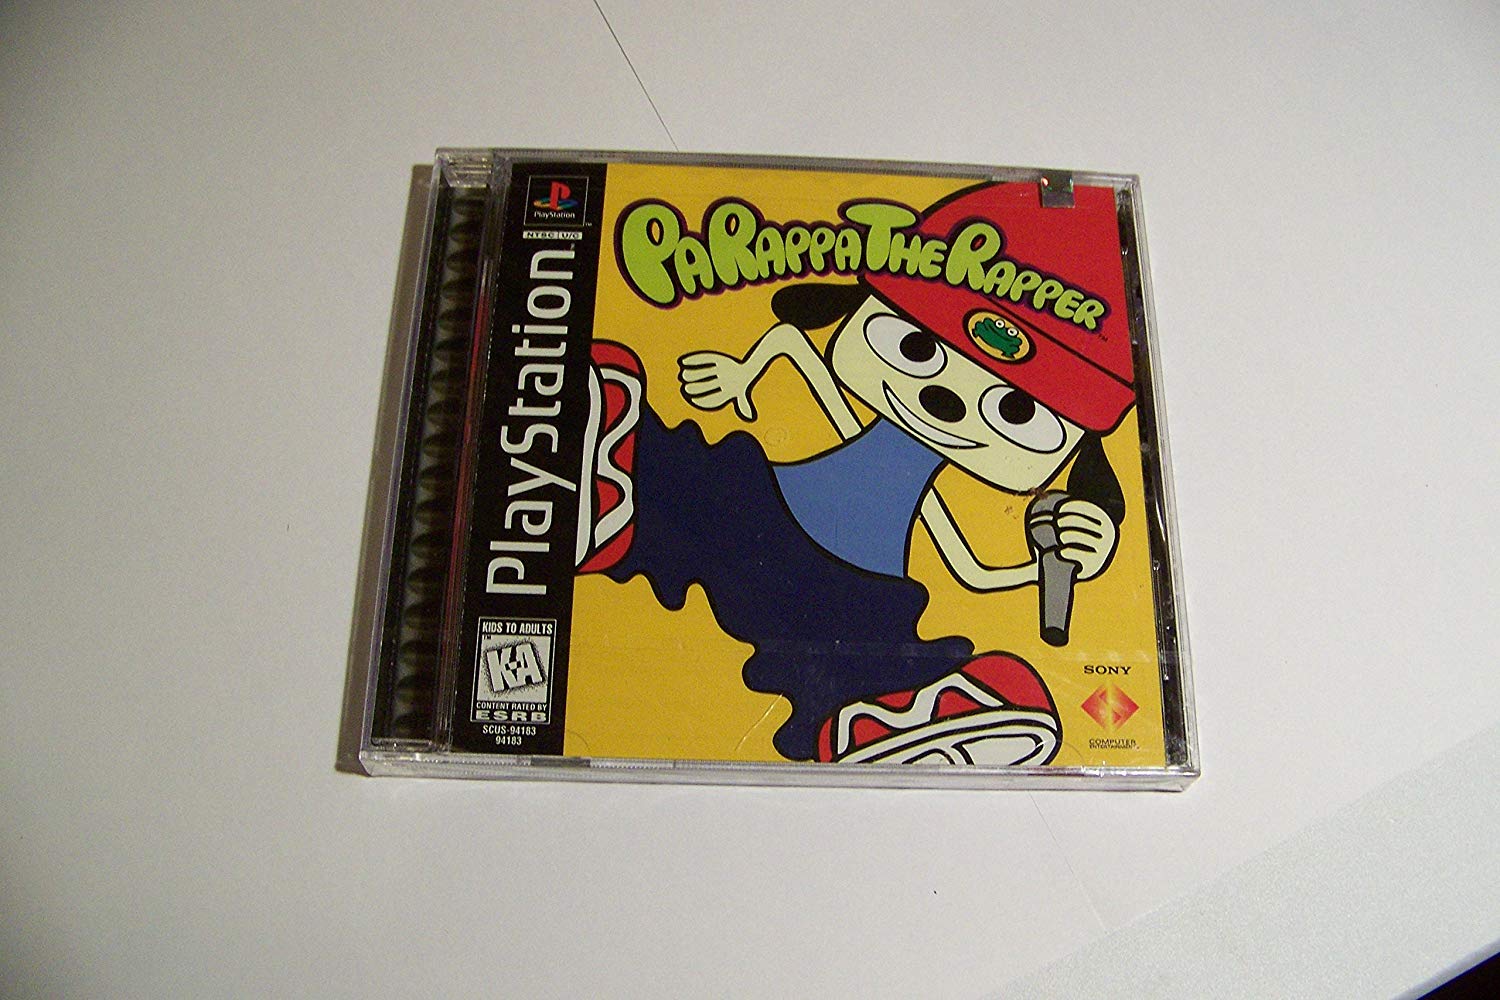 PaRappa the Rapper ROM & ISO - PSP Game